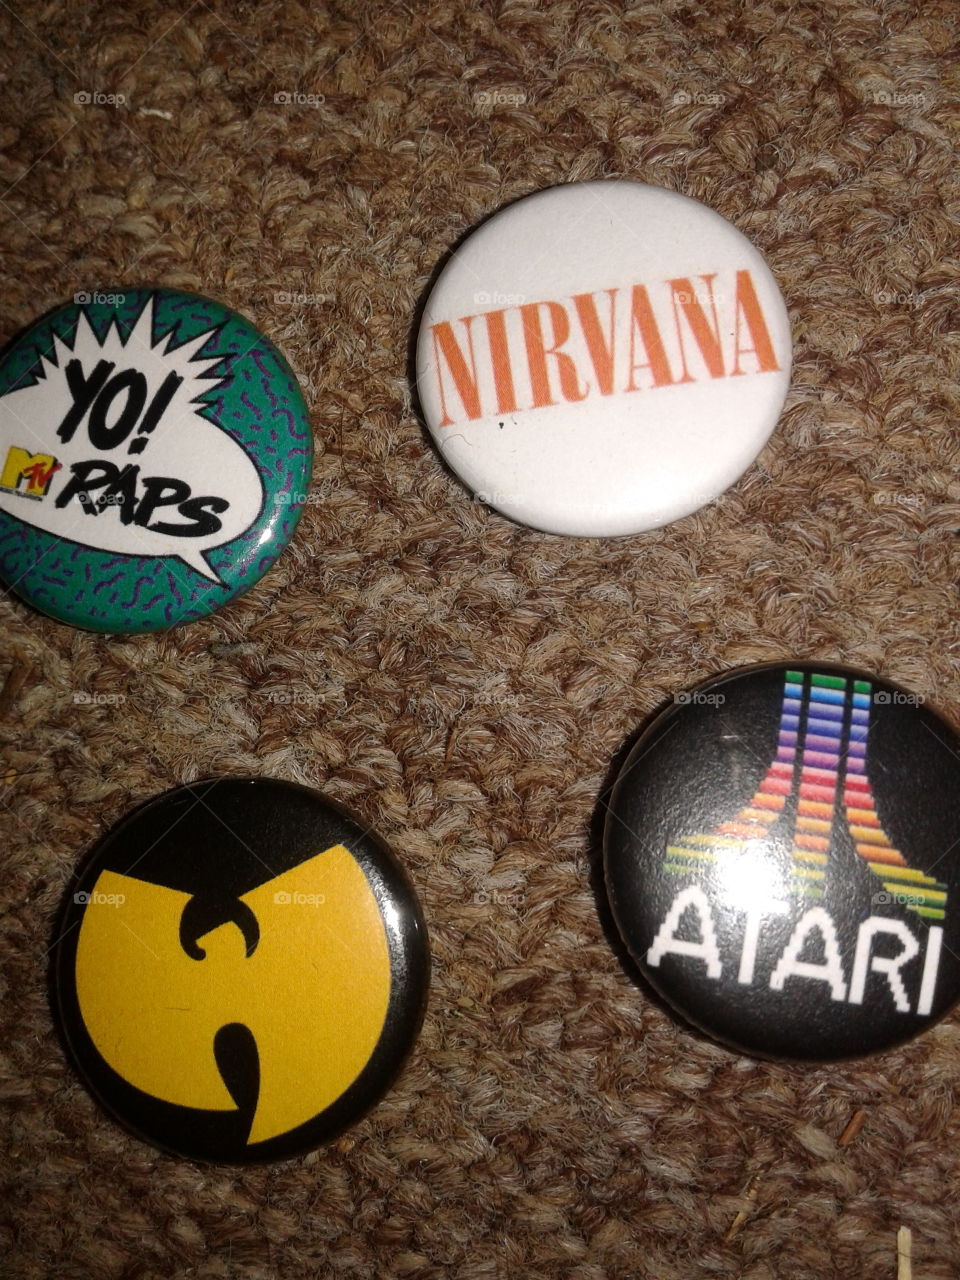 80s & 90s buttons